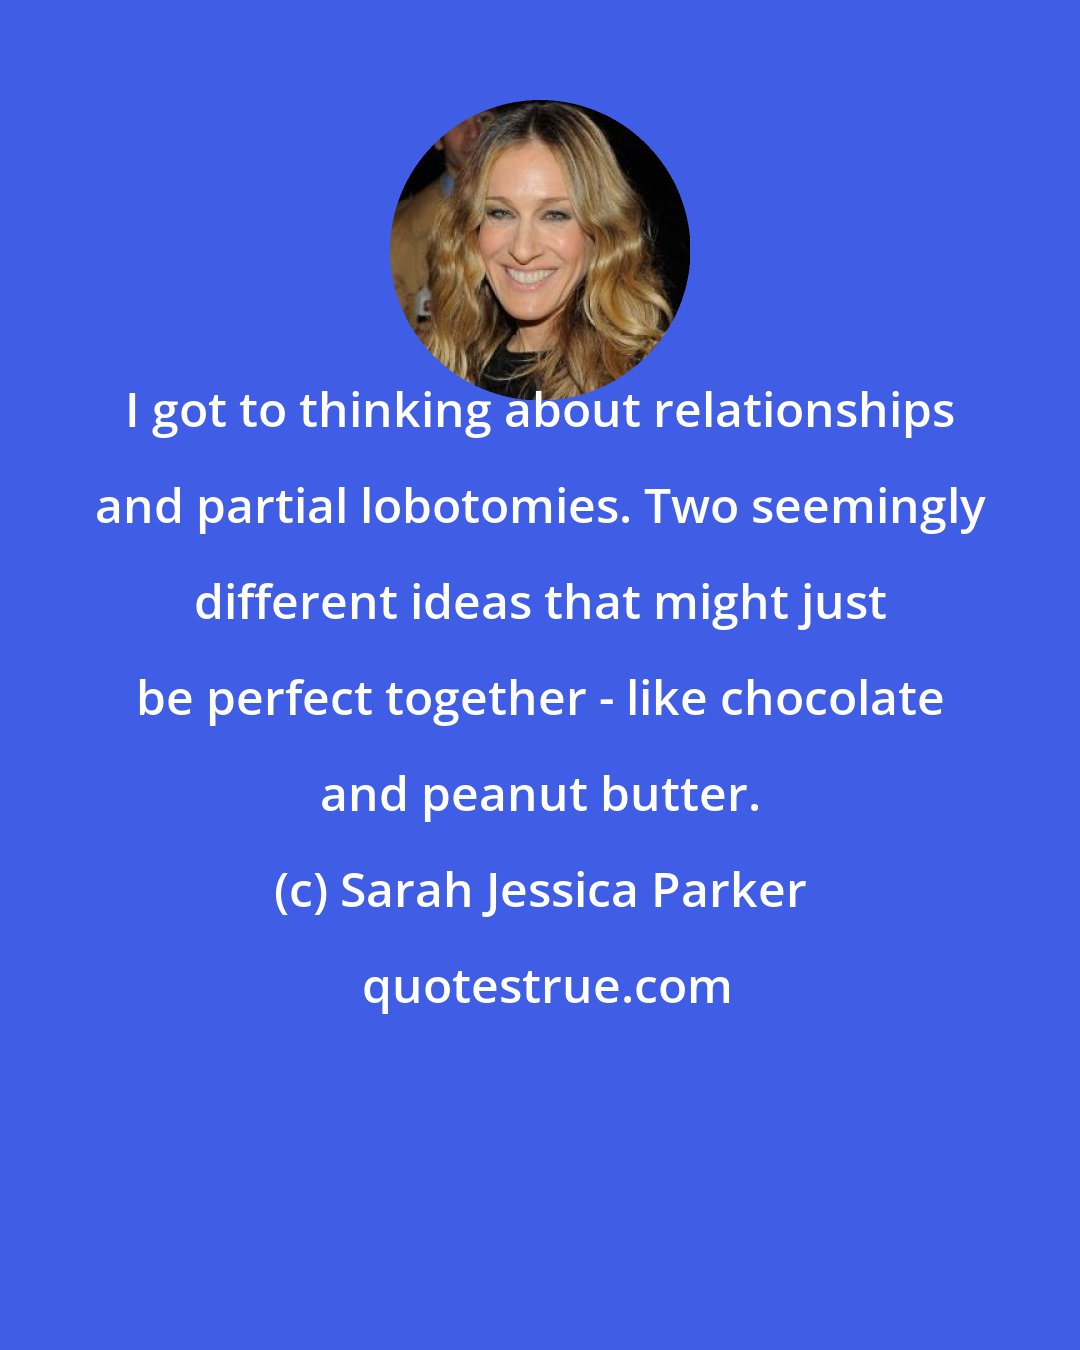 Sarah Jessica Parker: I got to thinking about relationships and partial lobotomies. Two seemingly different ideas that might just be perfect together - like chocolate and peanut butter.